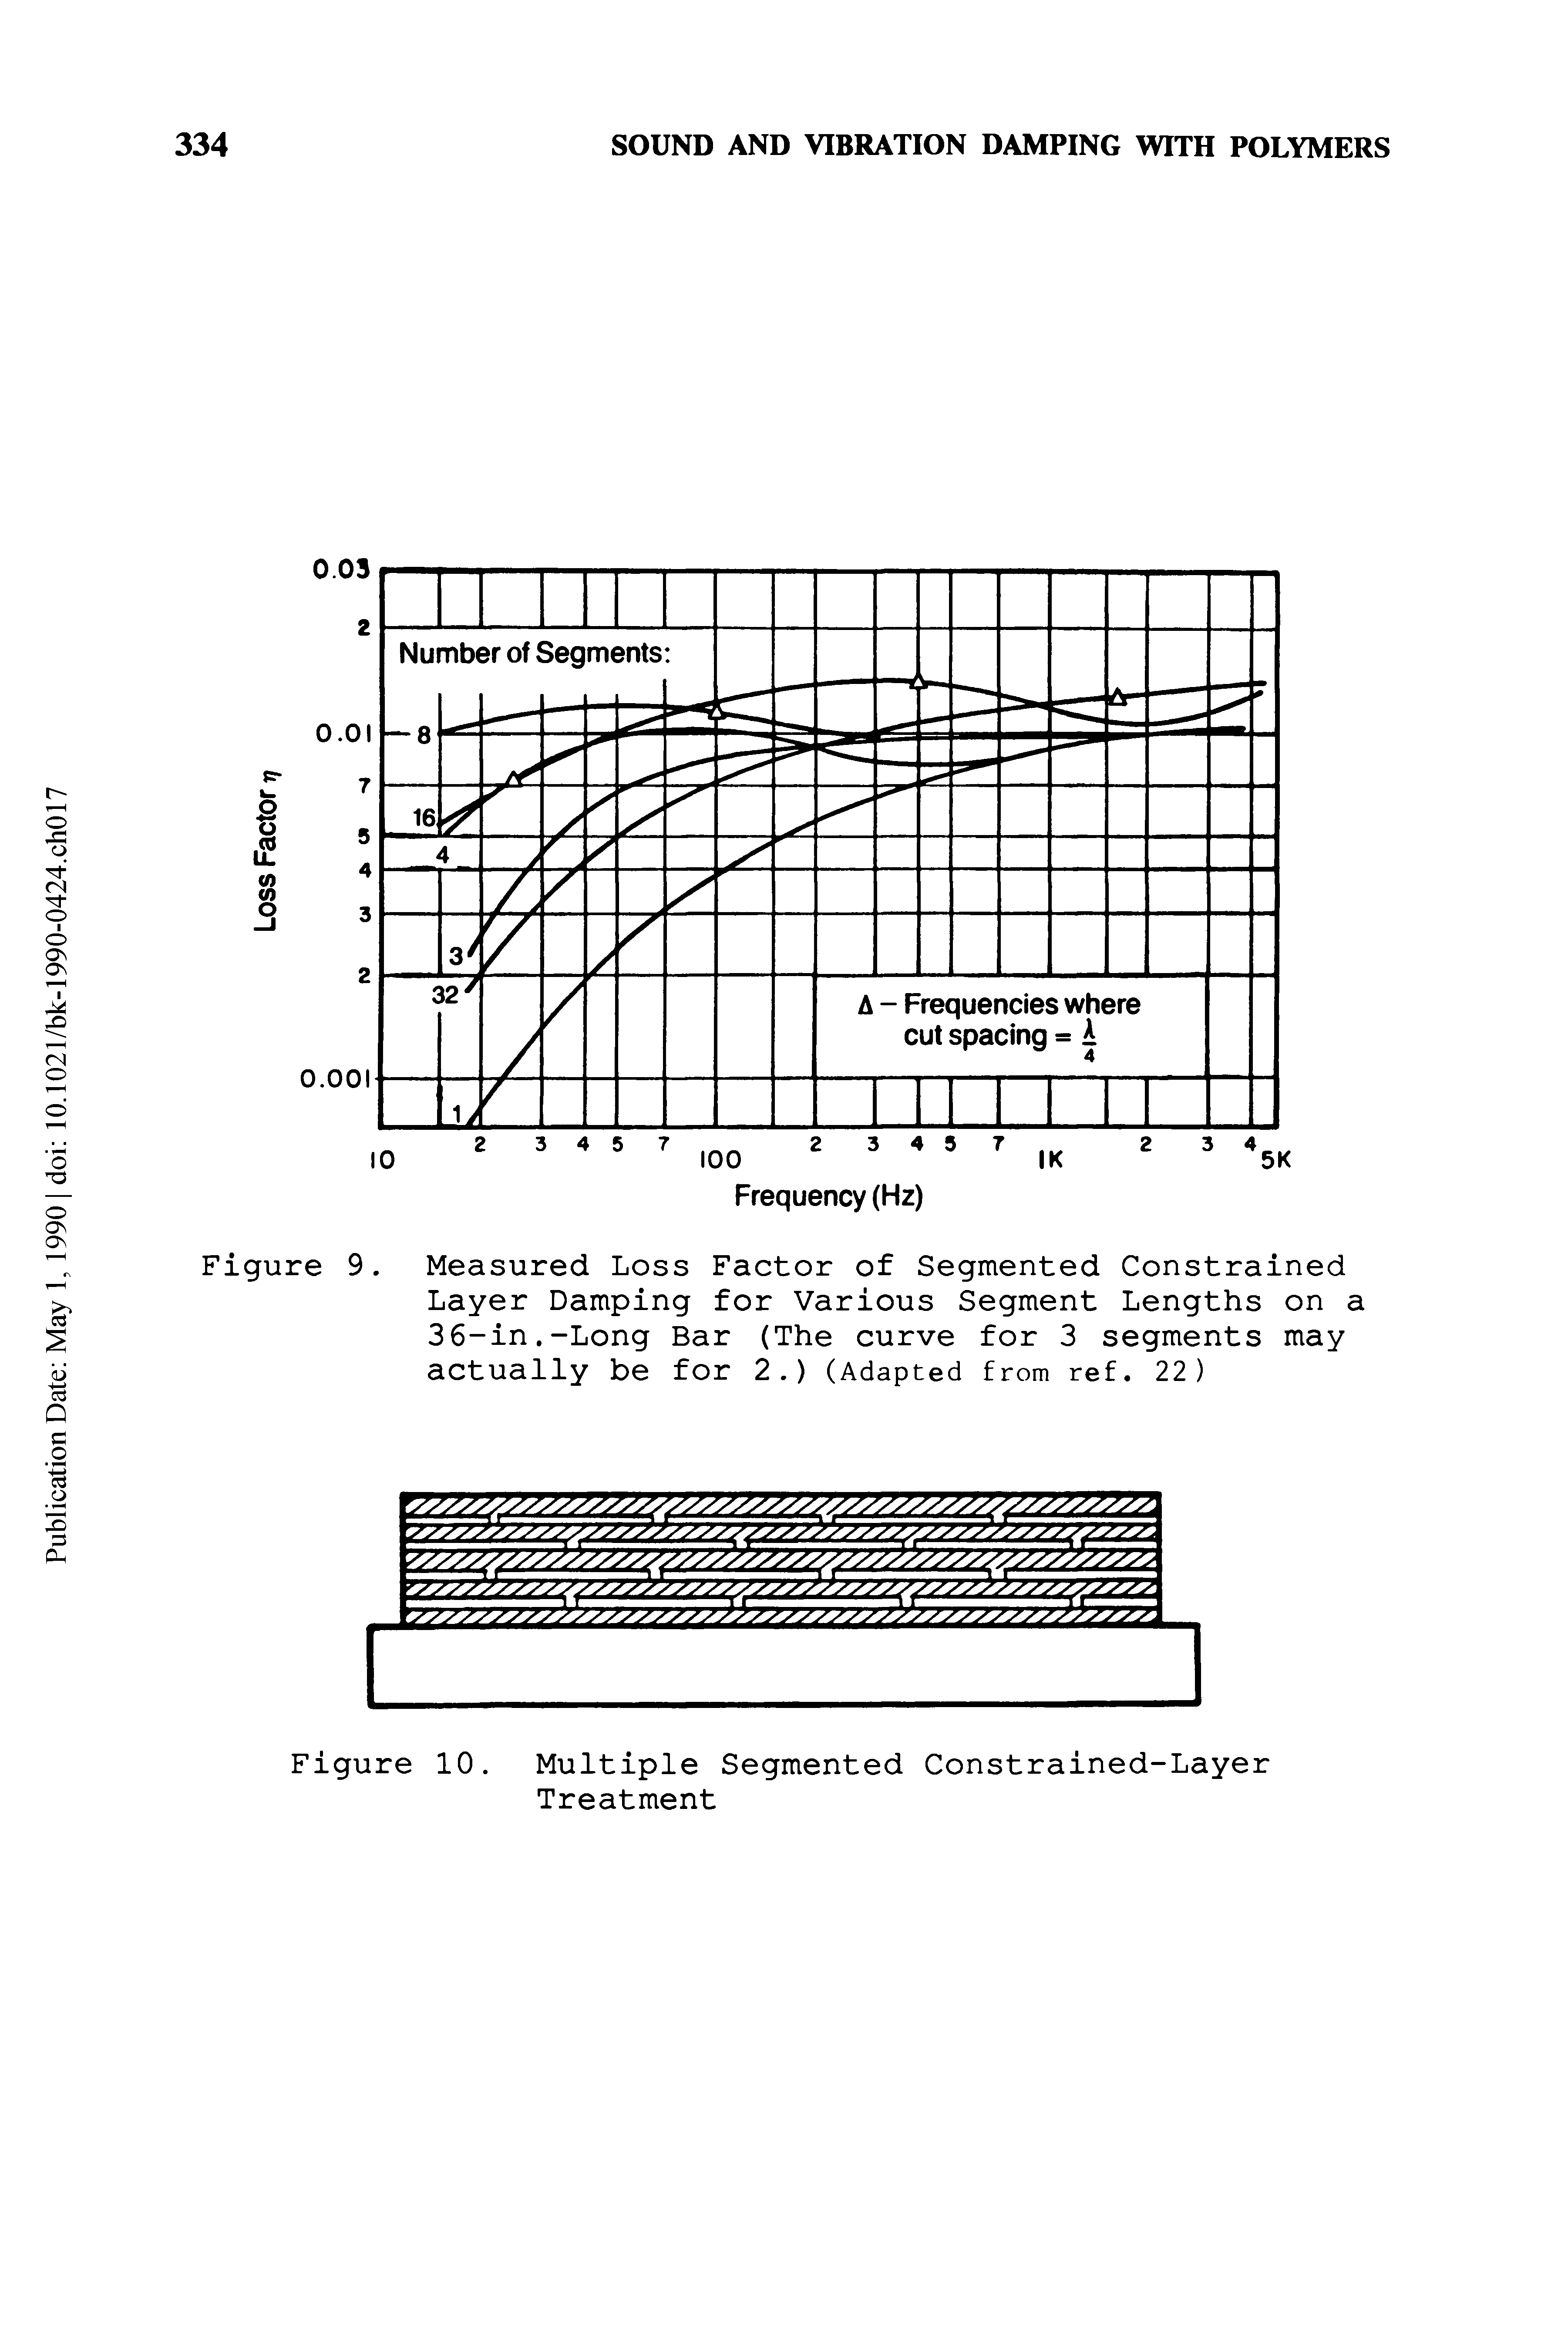 Figure 9. Measured Loss Factor of Segmented Constrained Layer Damping for Various Segment Lengths on a 36-in.-Long Bar (The curve for 3 segments may actually be for 2.) (Adapted from ref. 22)...